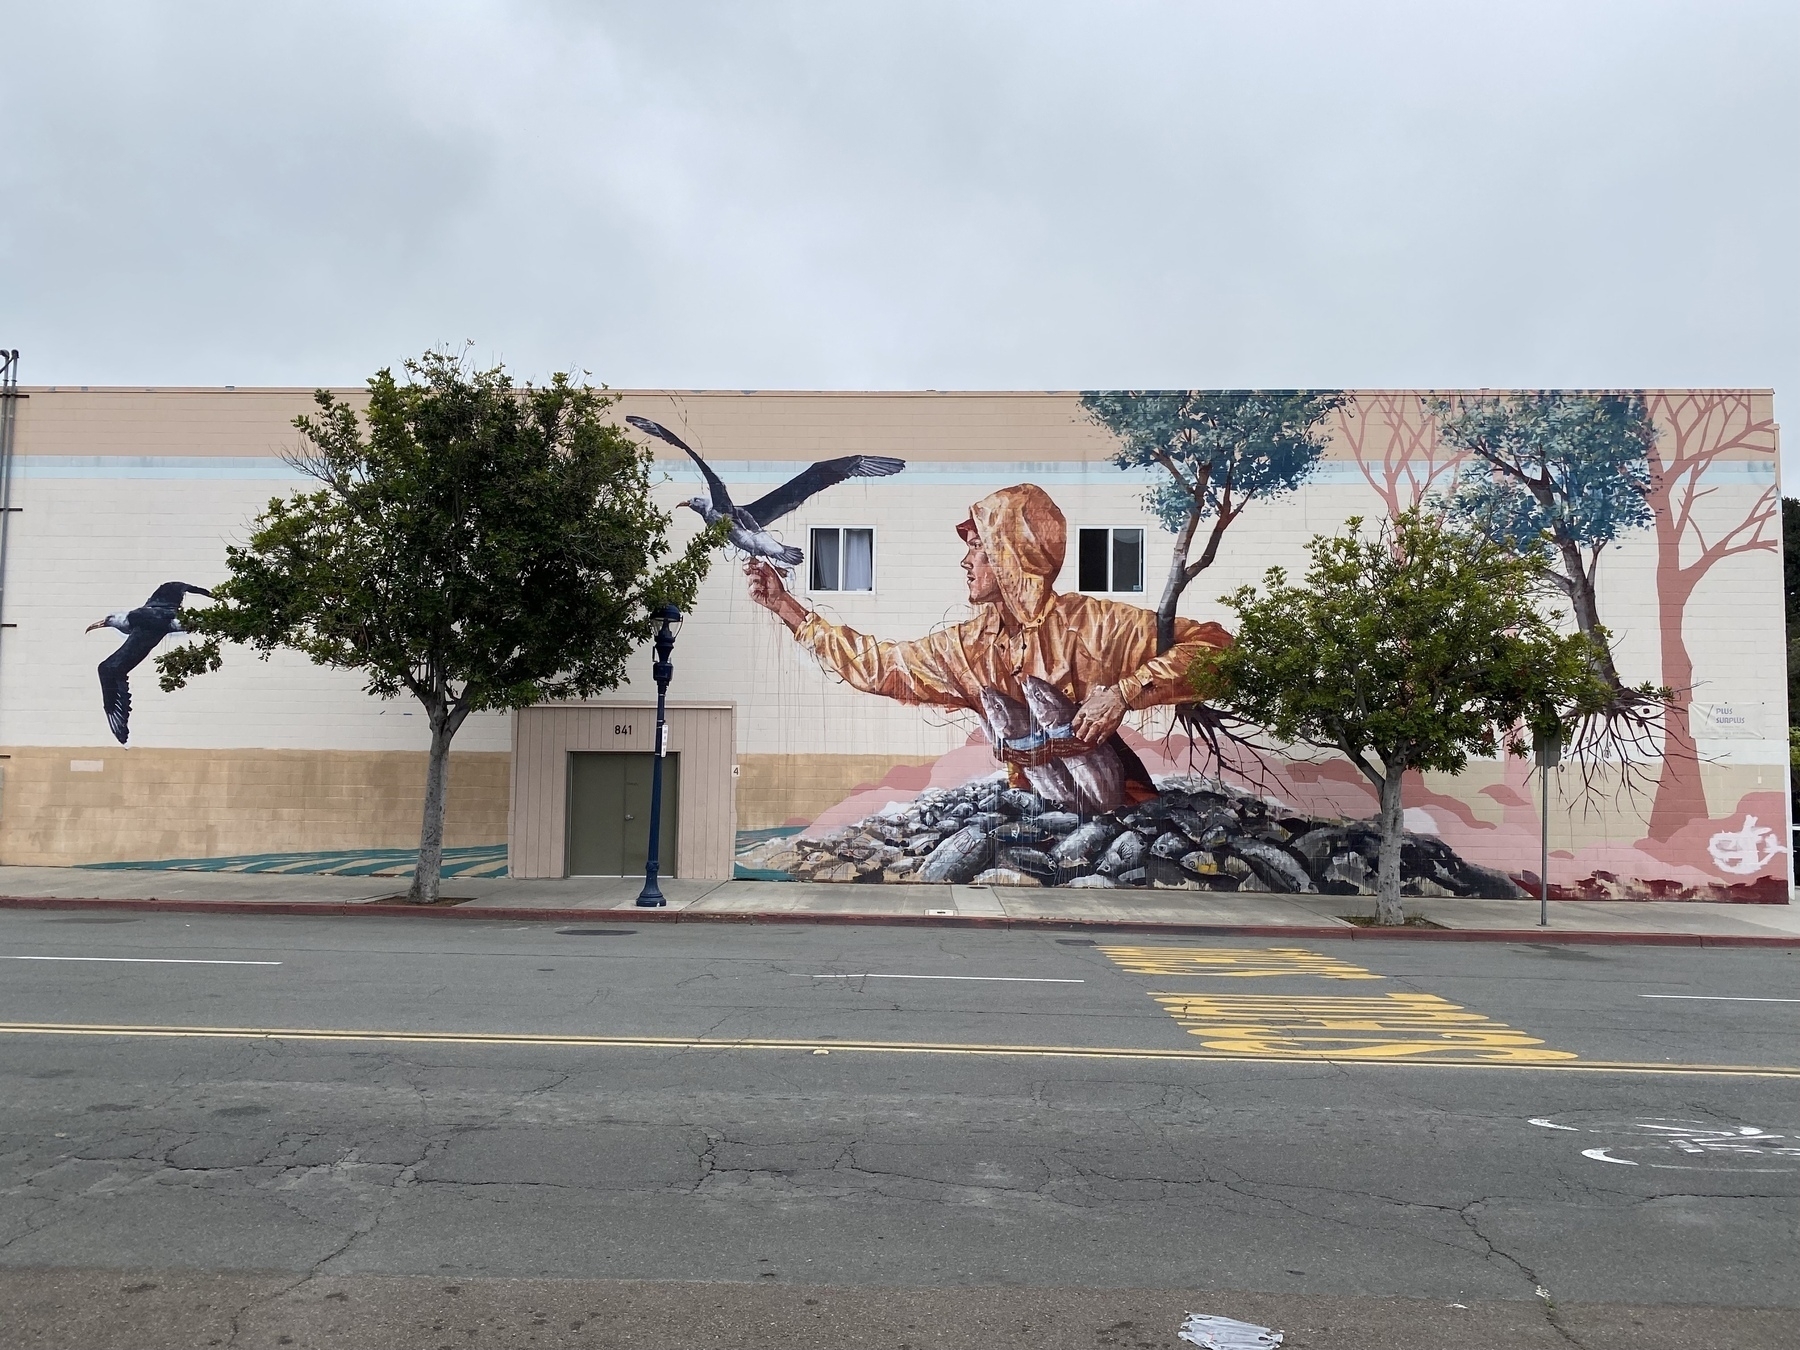 View from across the street of a mual on a building, a figure in a poncho with fish, seagulls, and floating trees; two trees are growing from the sidewalk and blend into the mural.